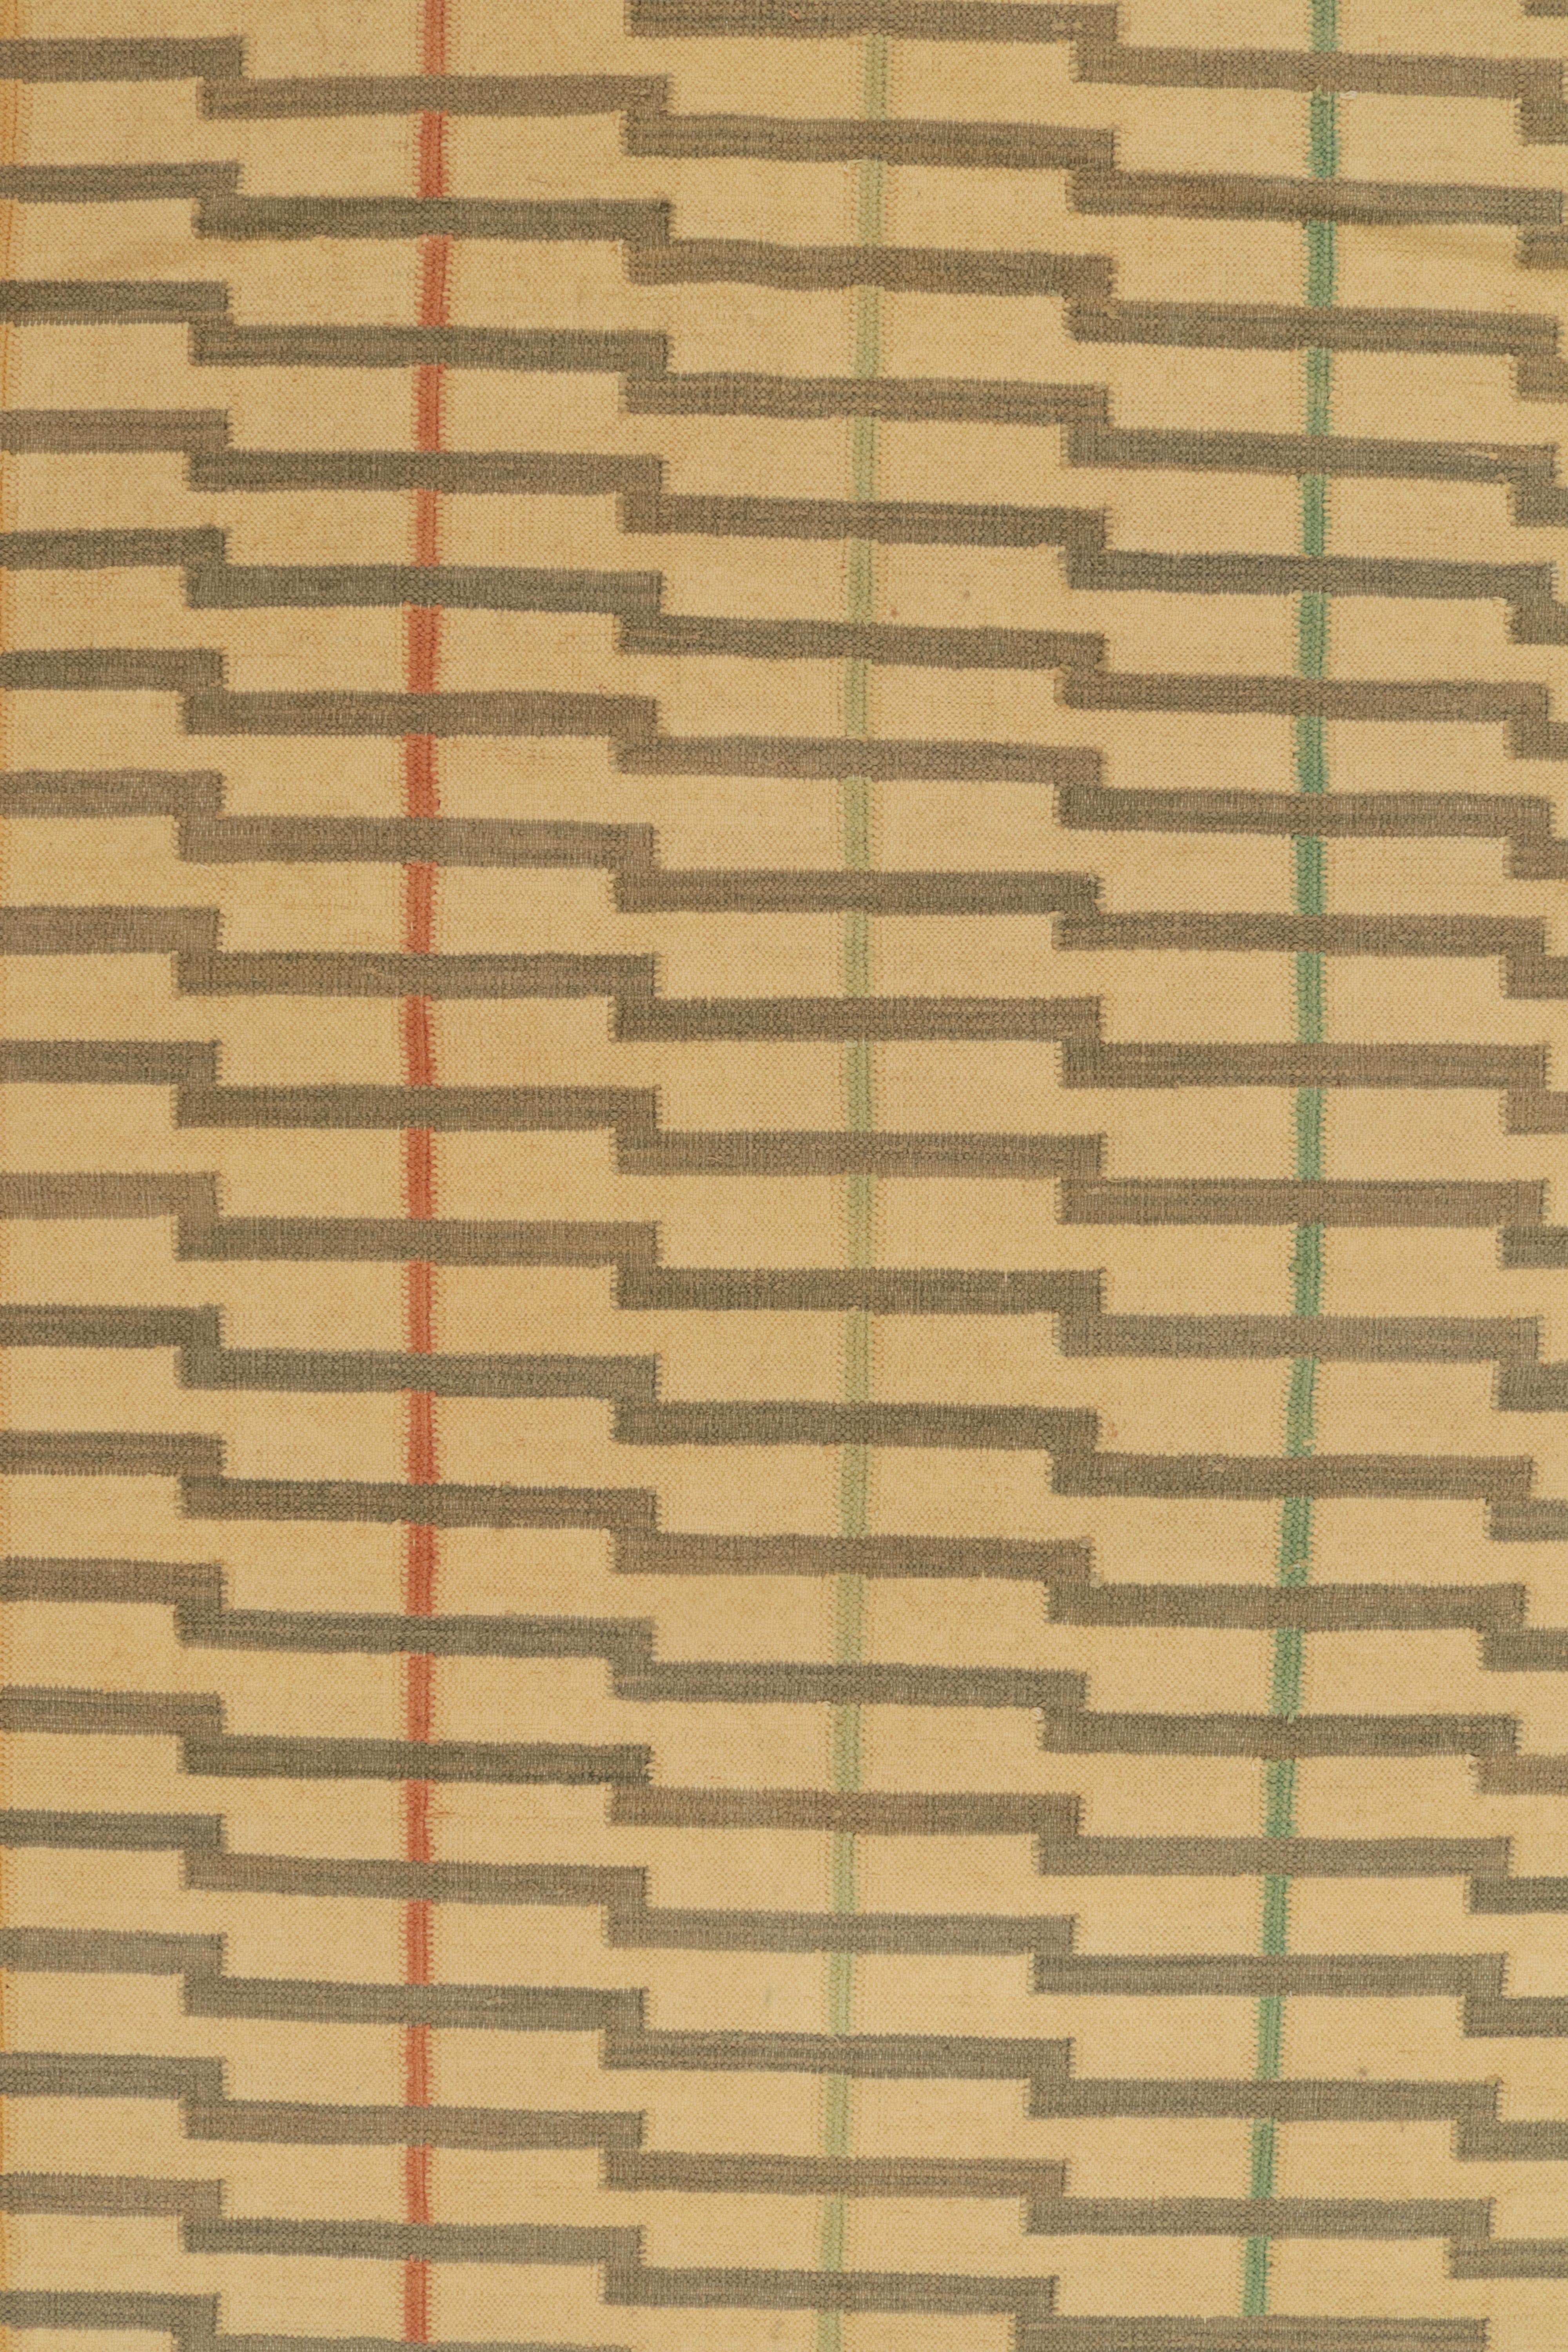 Hand-Woven Rug & Kilim's Contemporary Striped Flat Weave, Cream, Beige Brown Pattern For Sale